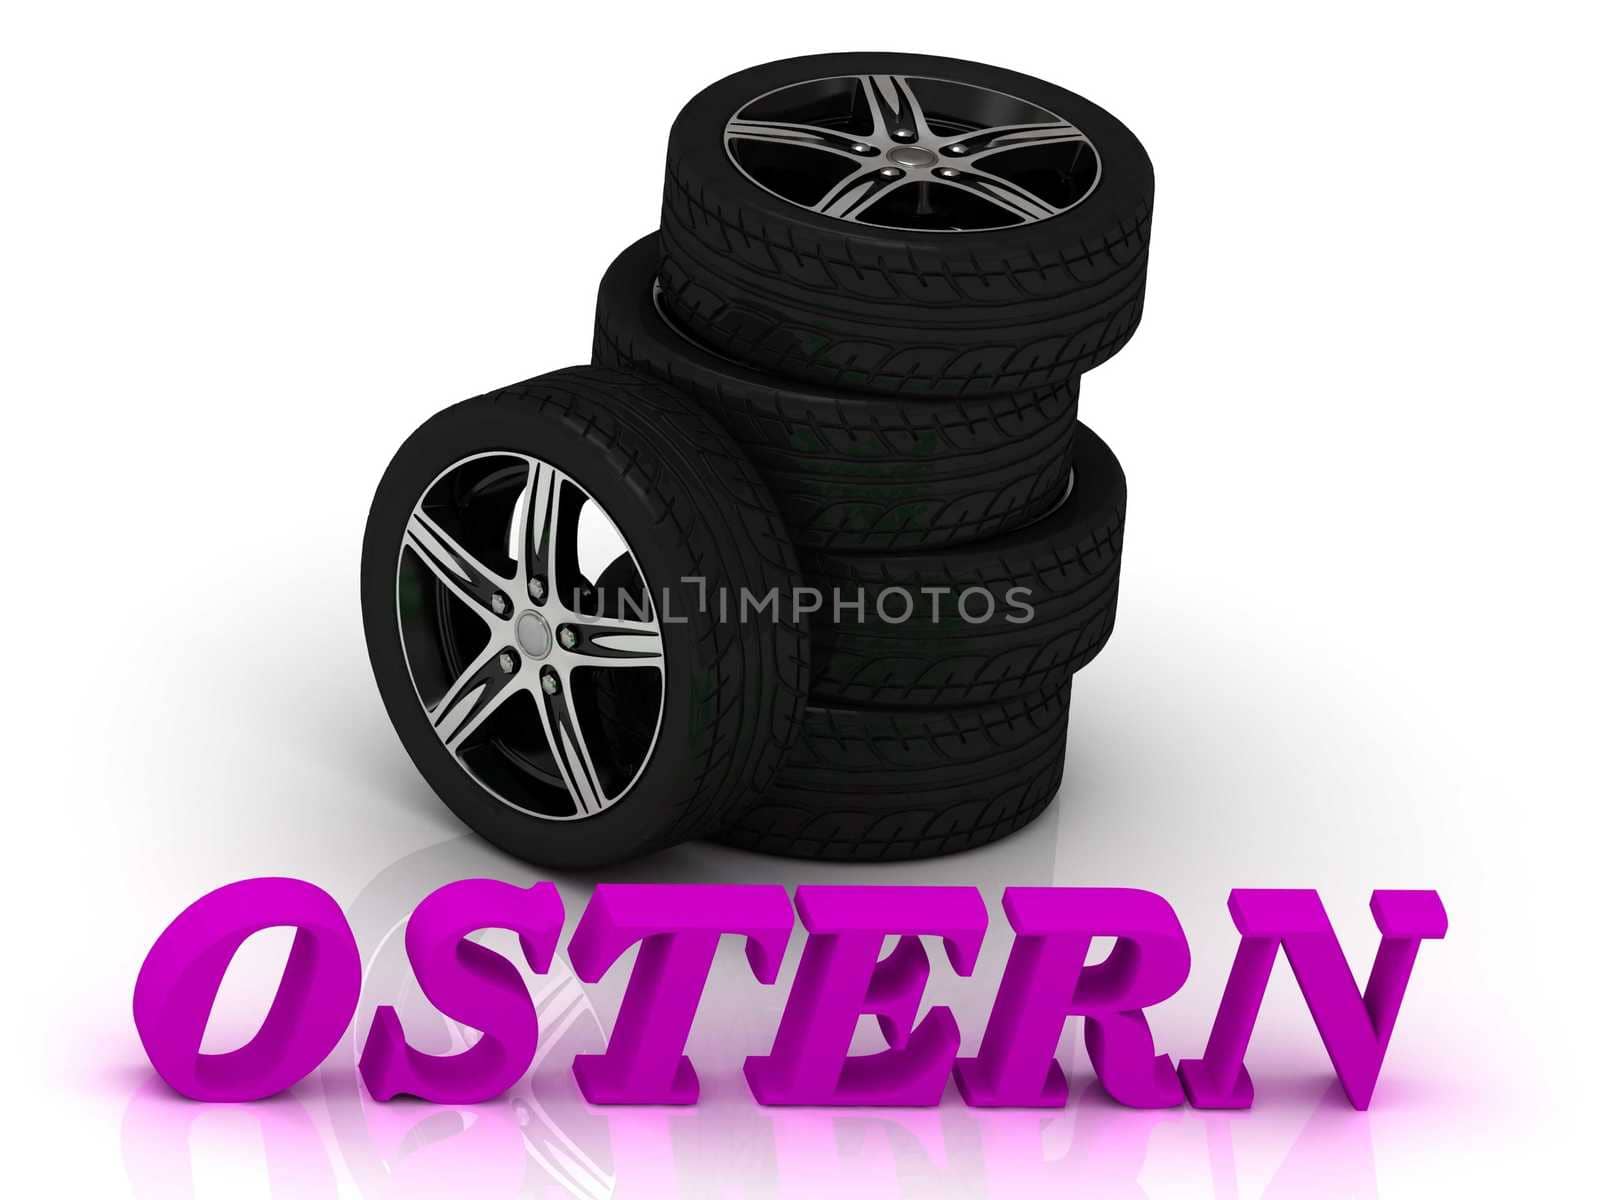 OSTERN- bright letters and rims mashine black wheels on a white background